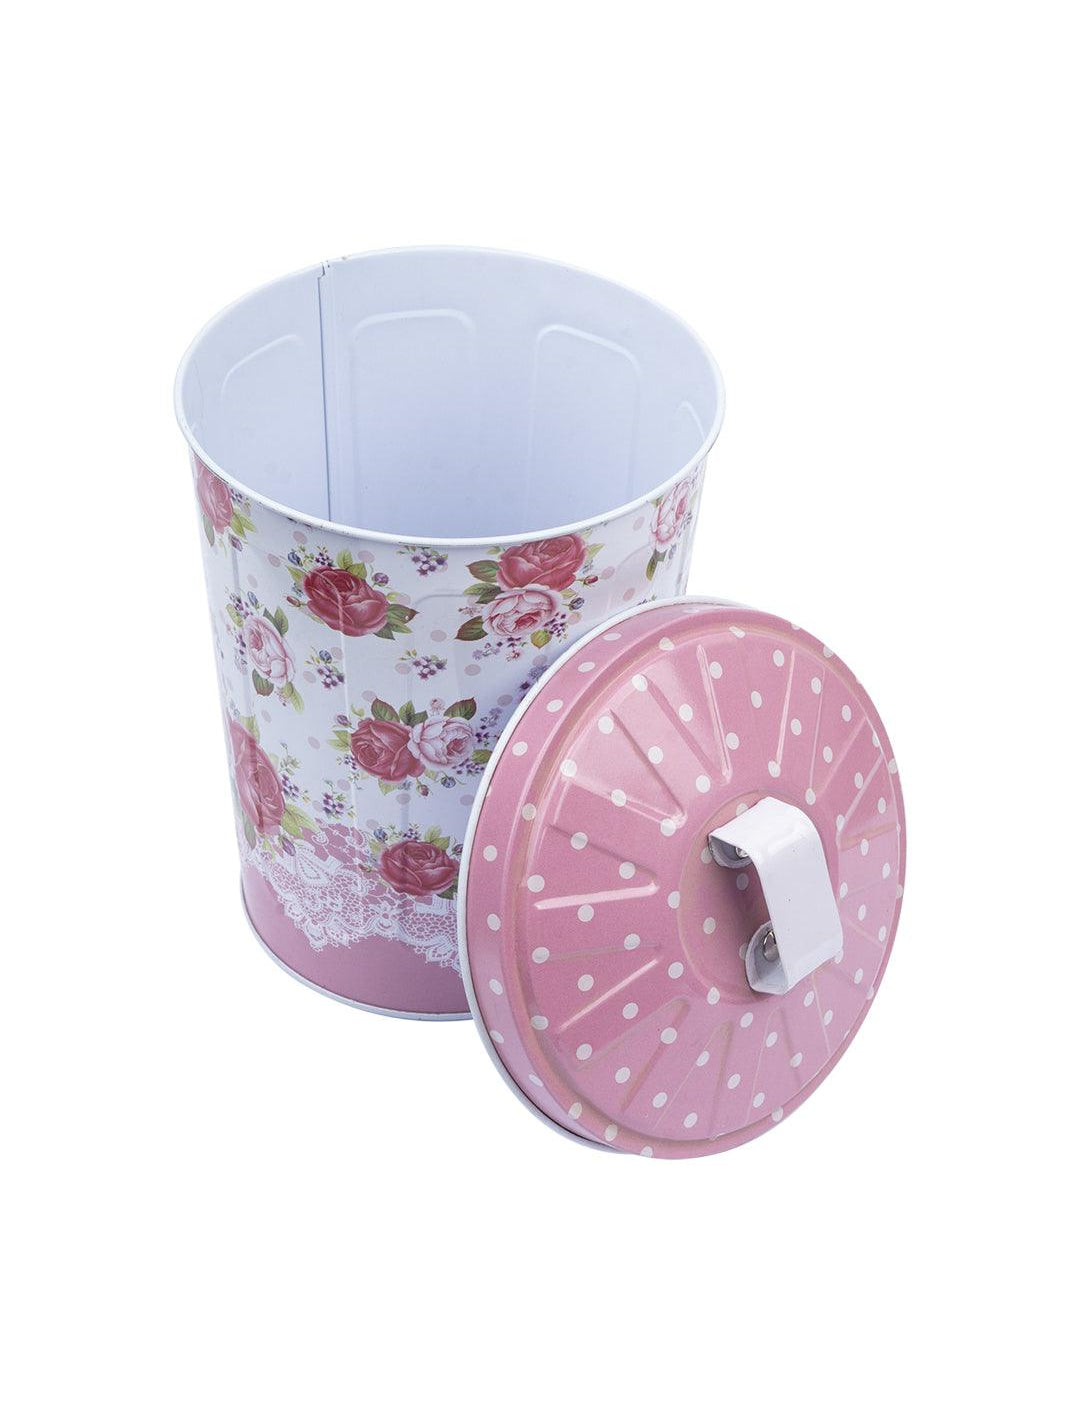 Floral Design Cylindrical Canister With Lid - Pink - MARKET 99